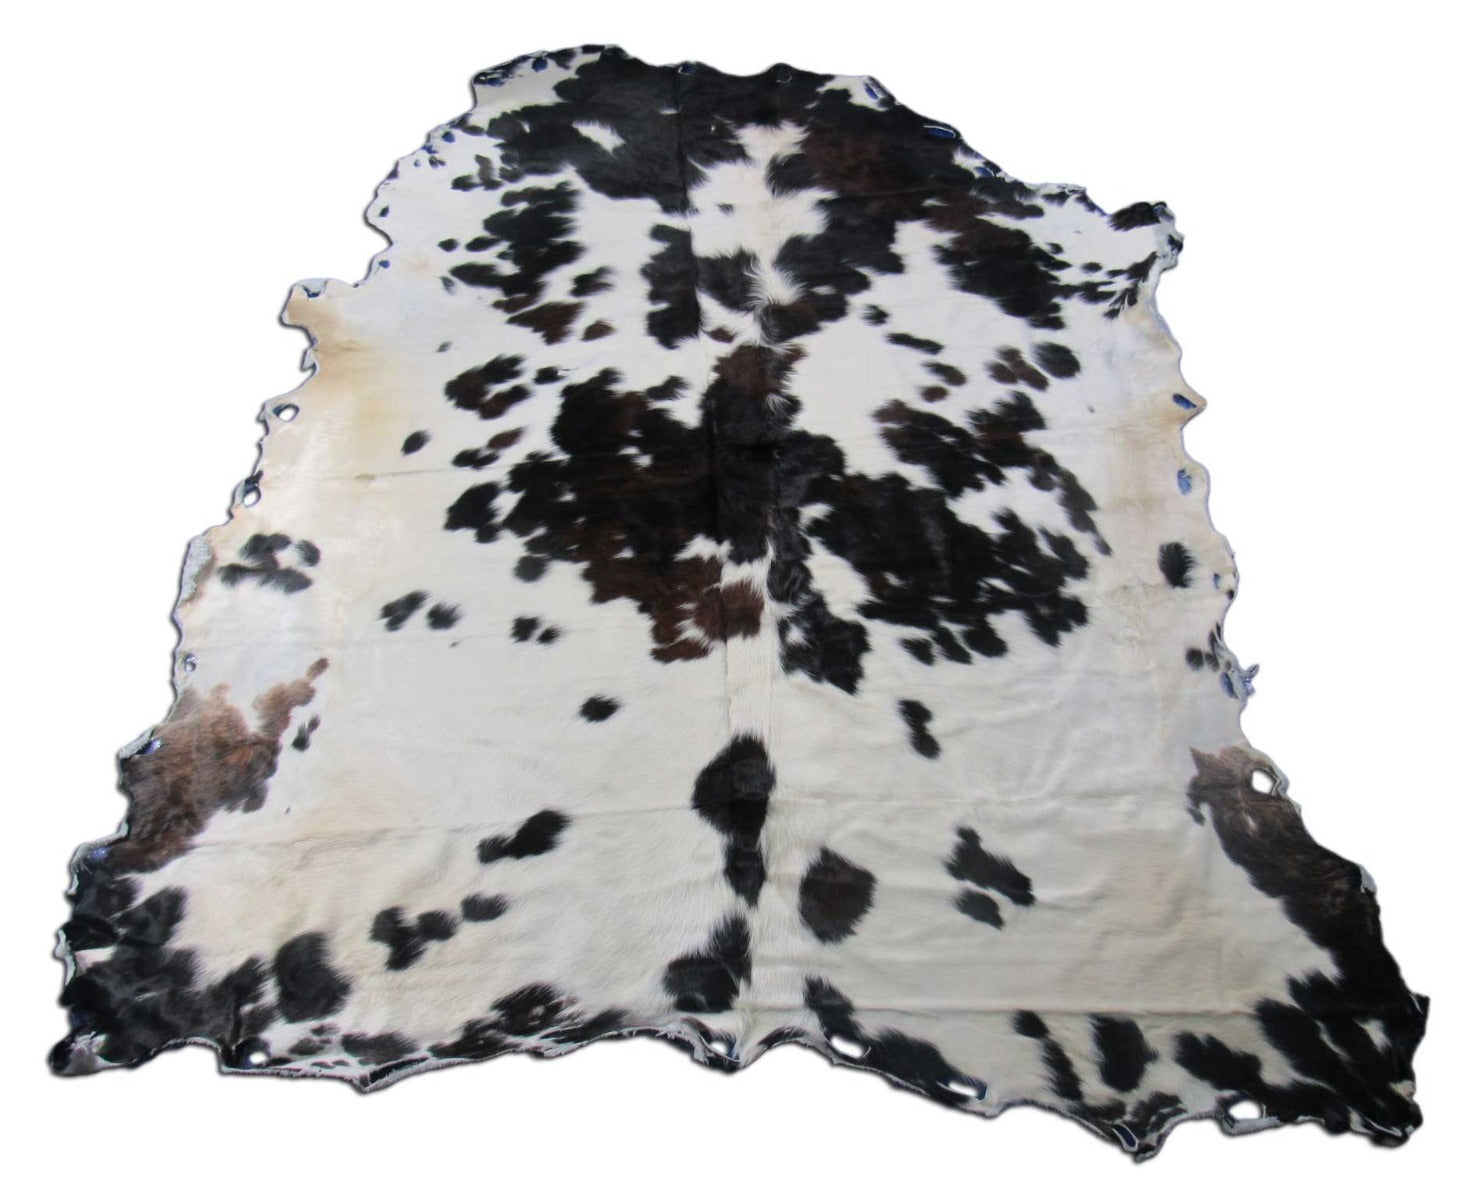 Untrimmed Tricolor Cowhide Rug Size: 8x6.7 feet M-1493